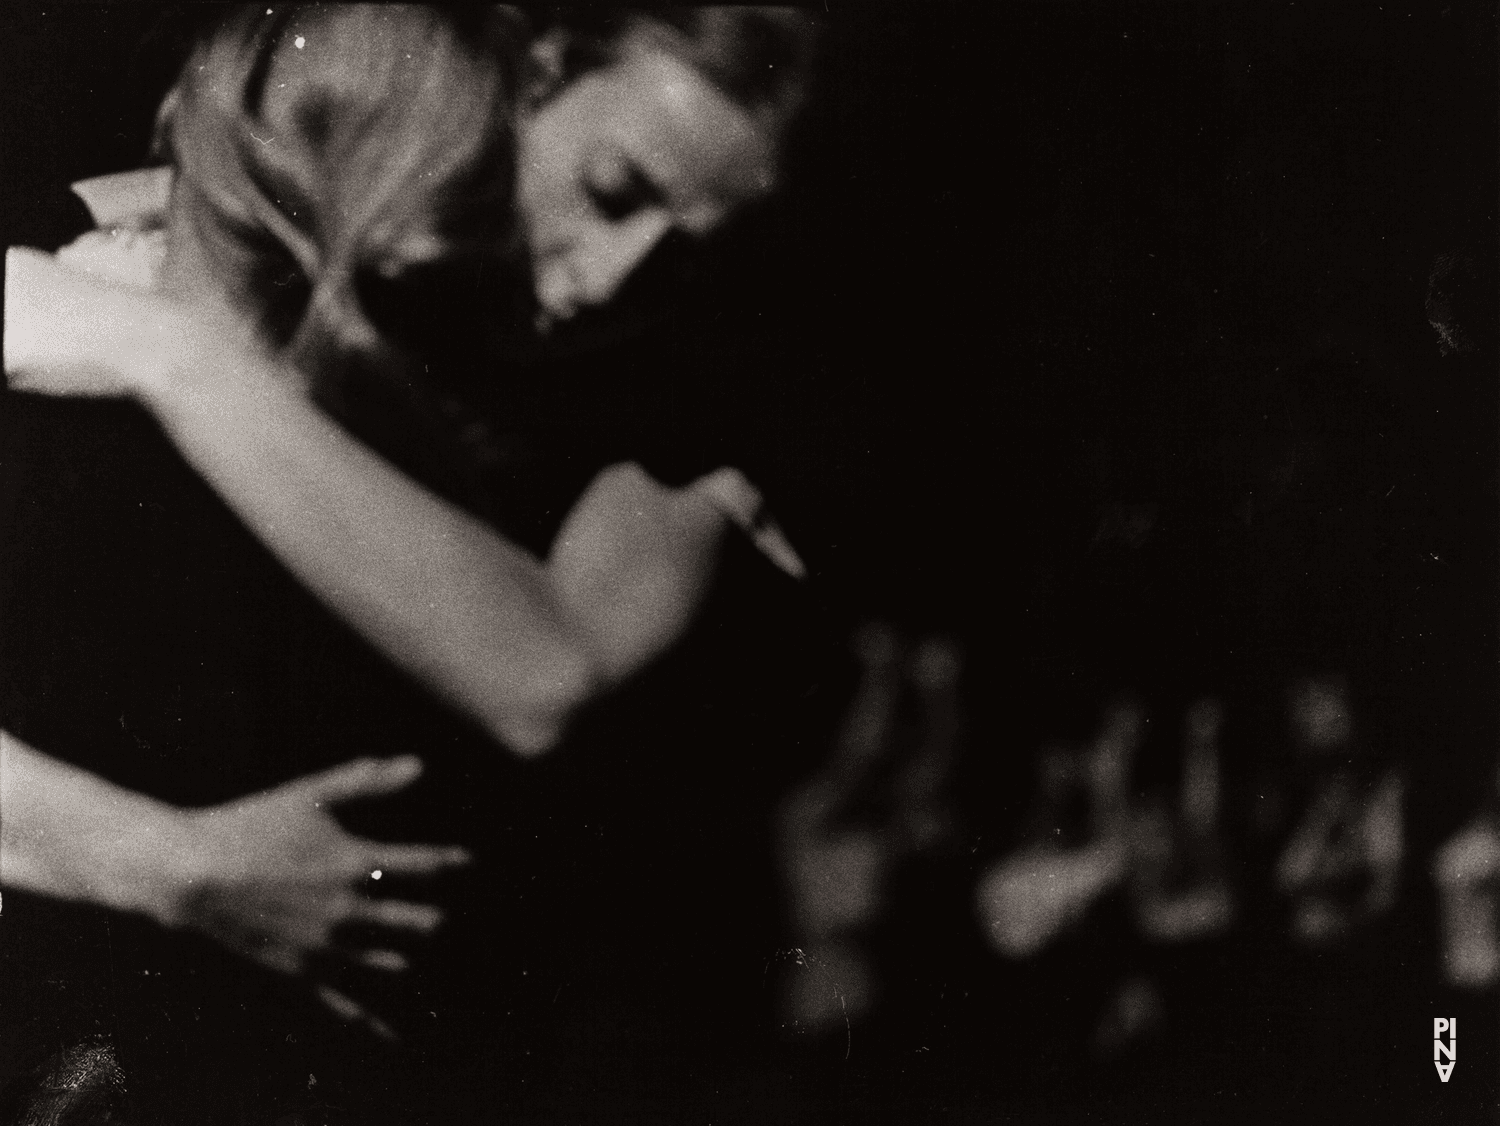 Marlis Alt and Tjitske Broersma in “Wind From West” by Pina Bausch